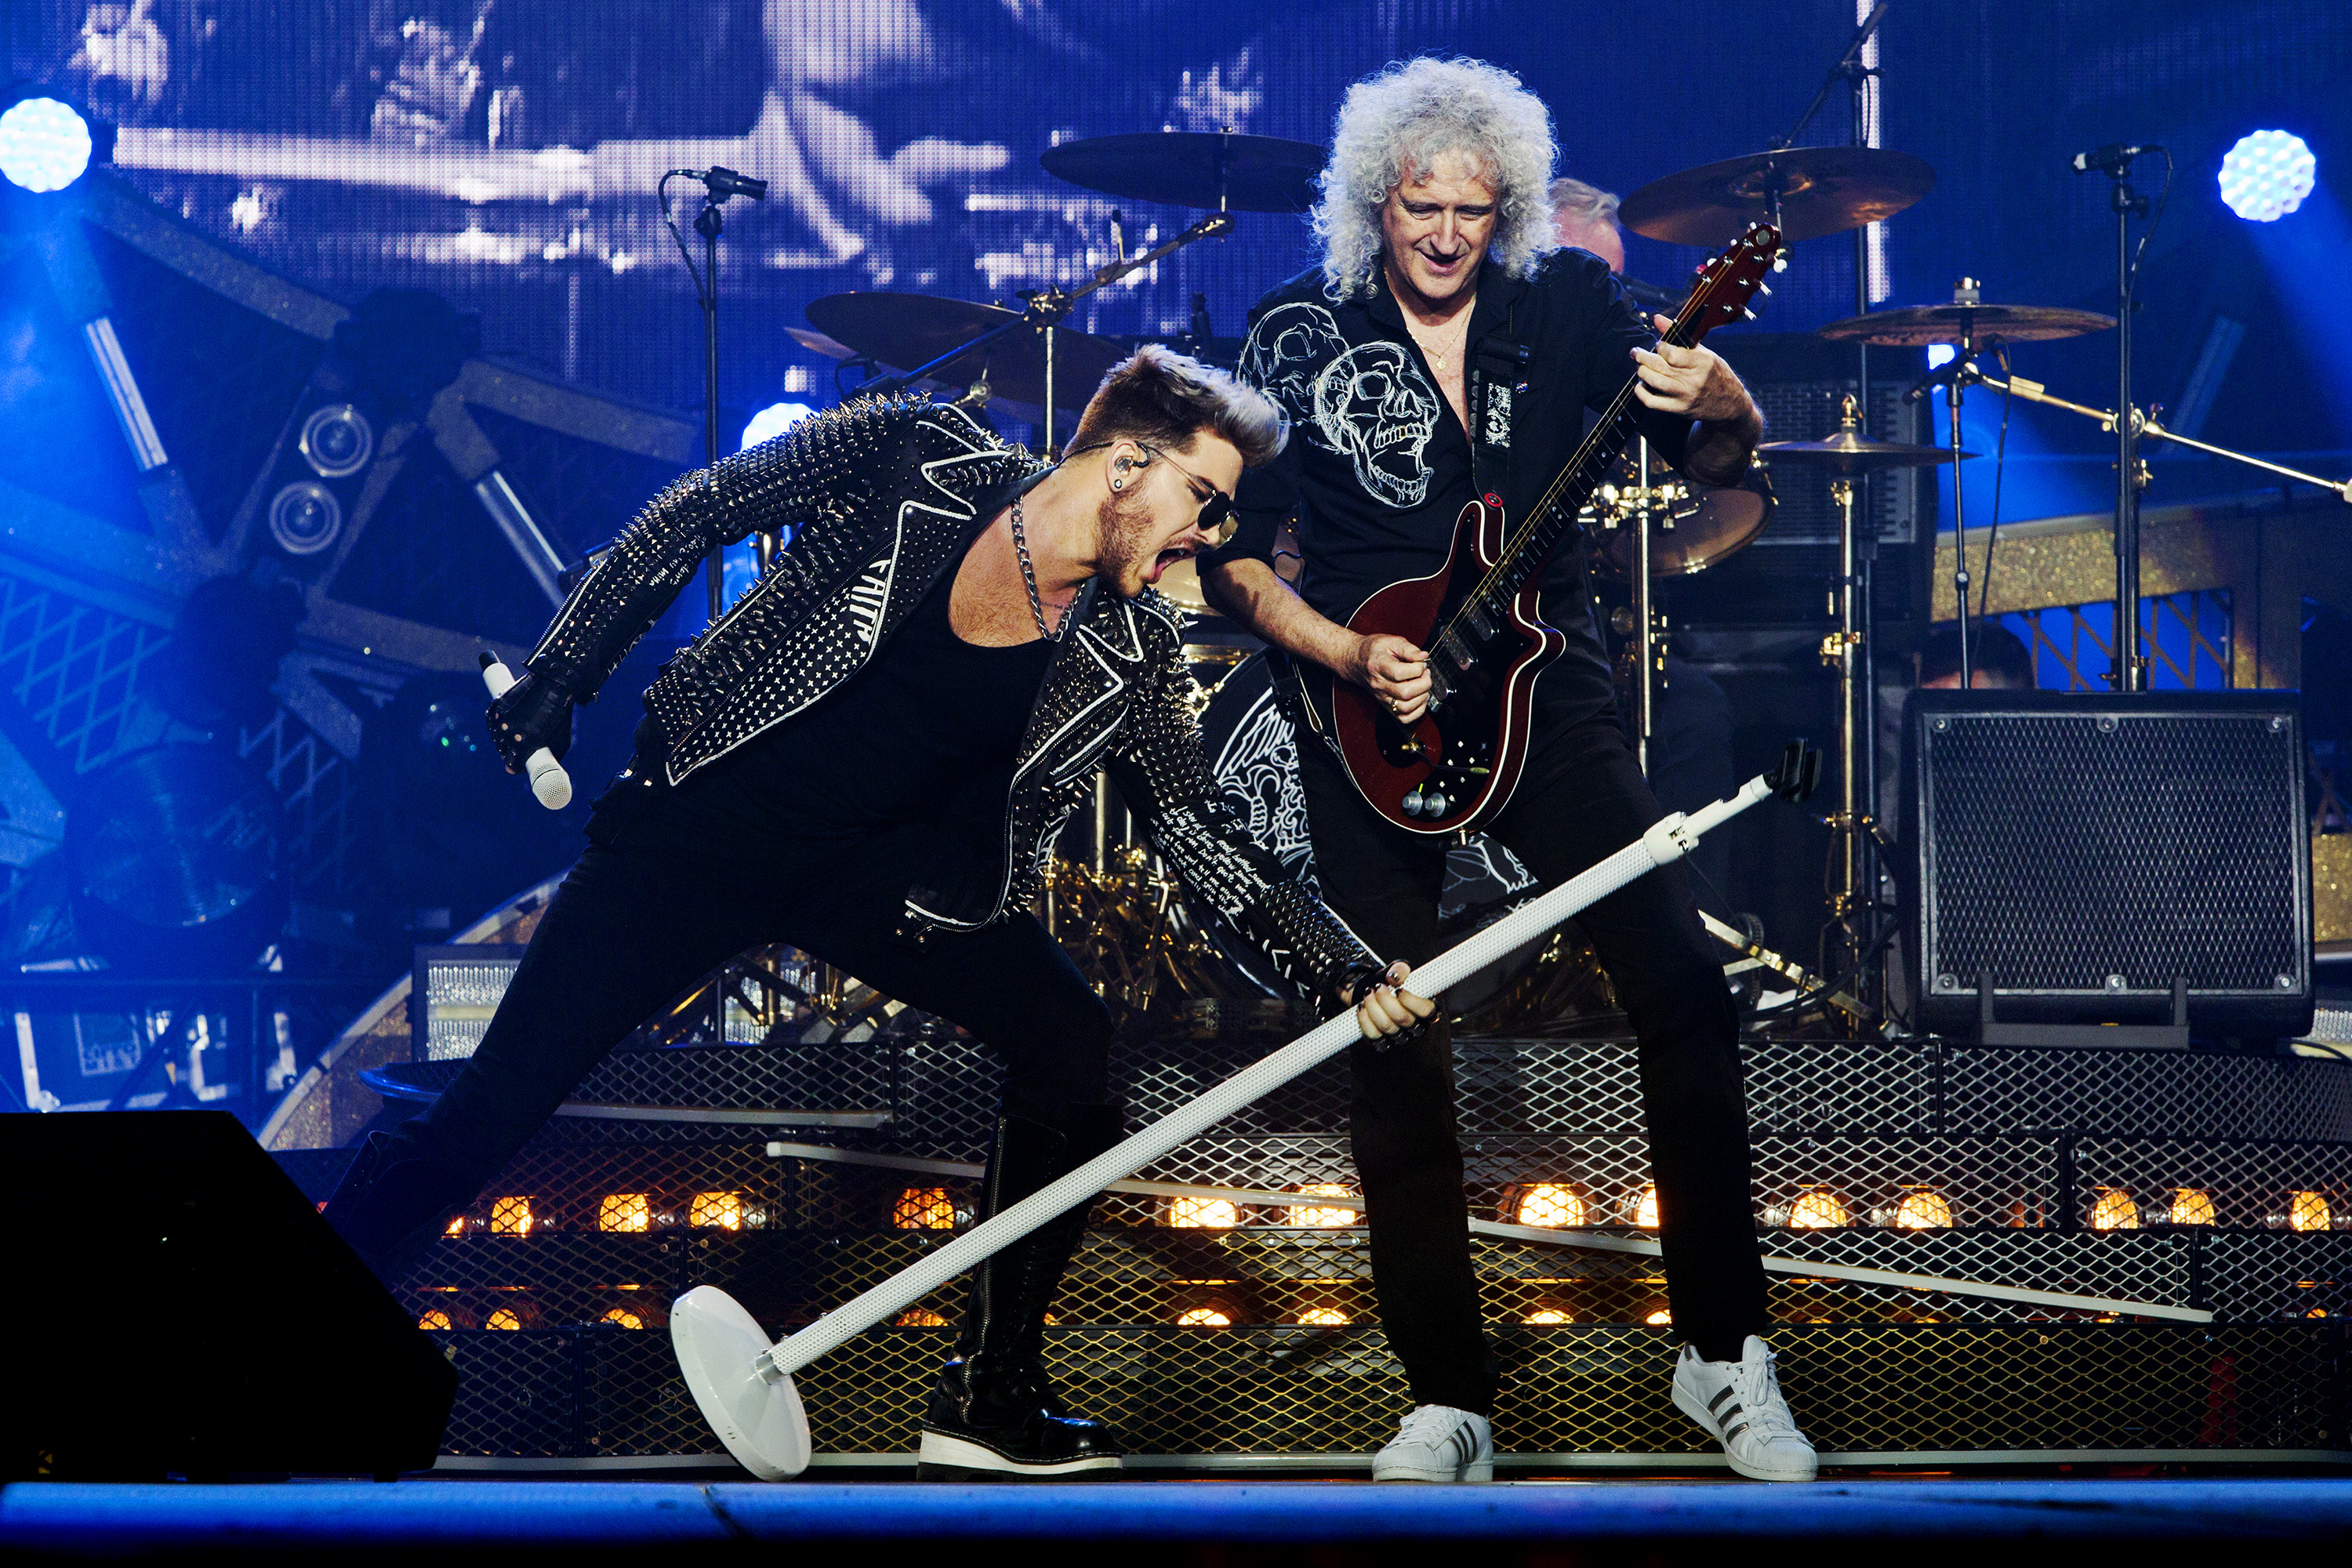 Best bets for April 29: Lambert reigns with Queen